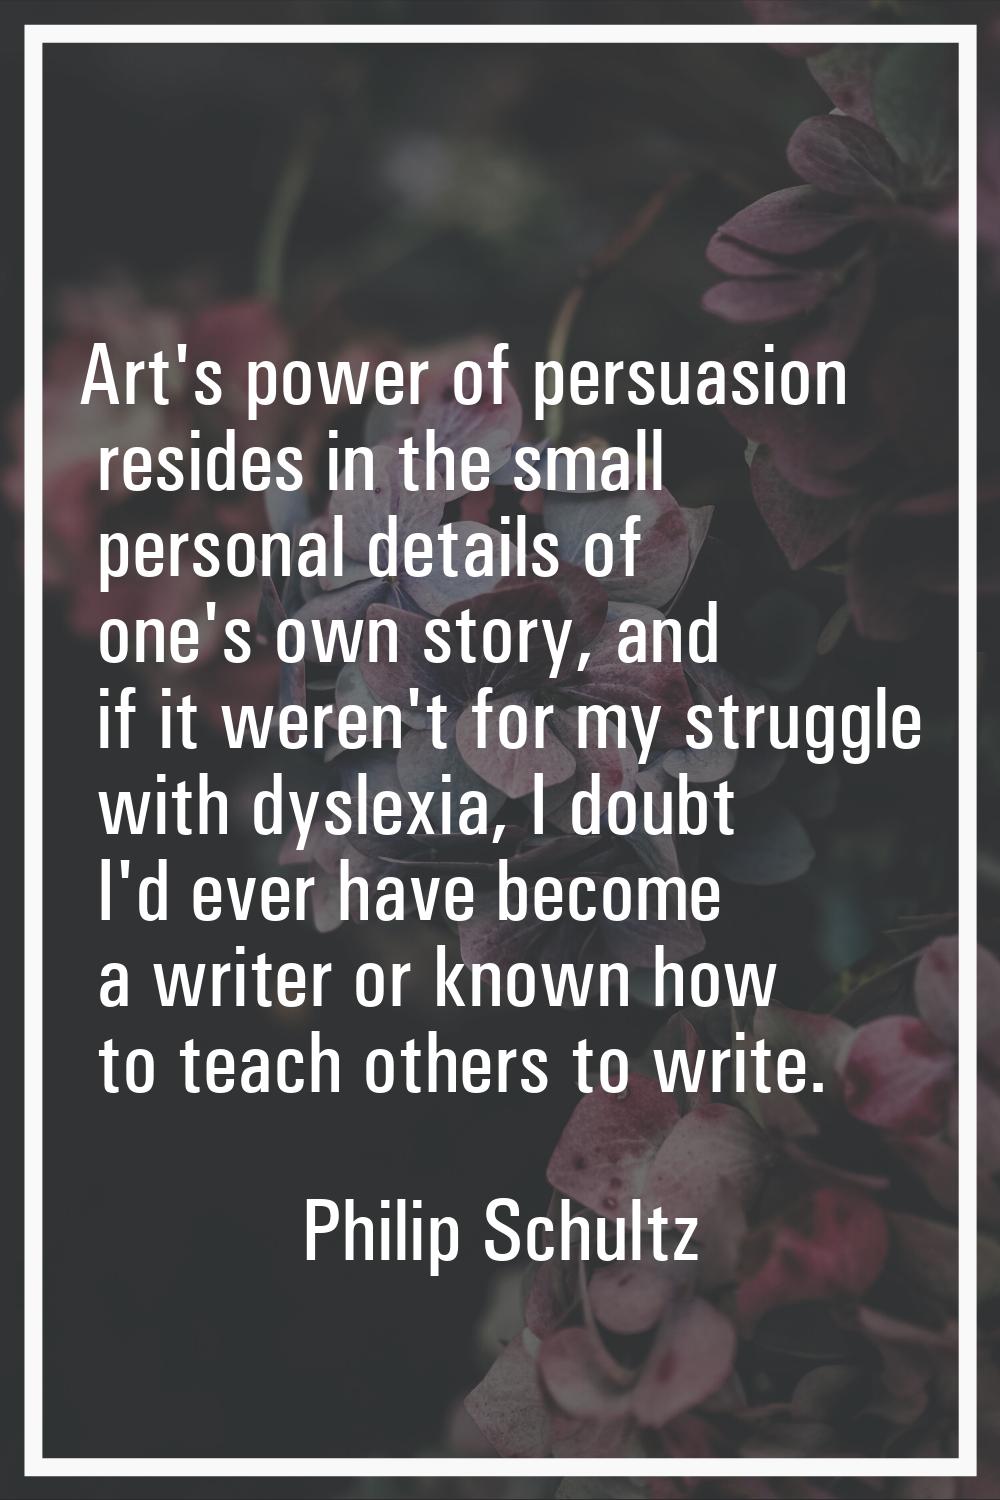 Art's power of persuasion resides in the small personal details of one's own story, and if it weren